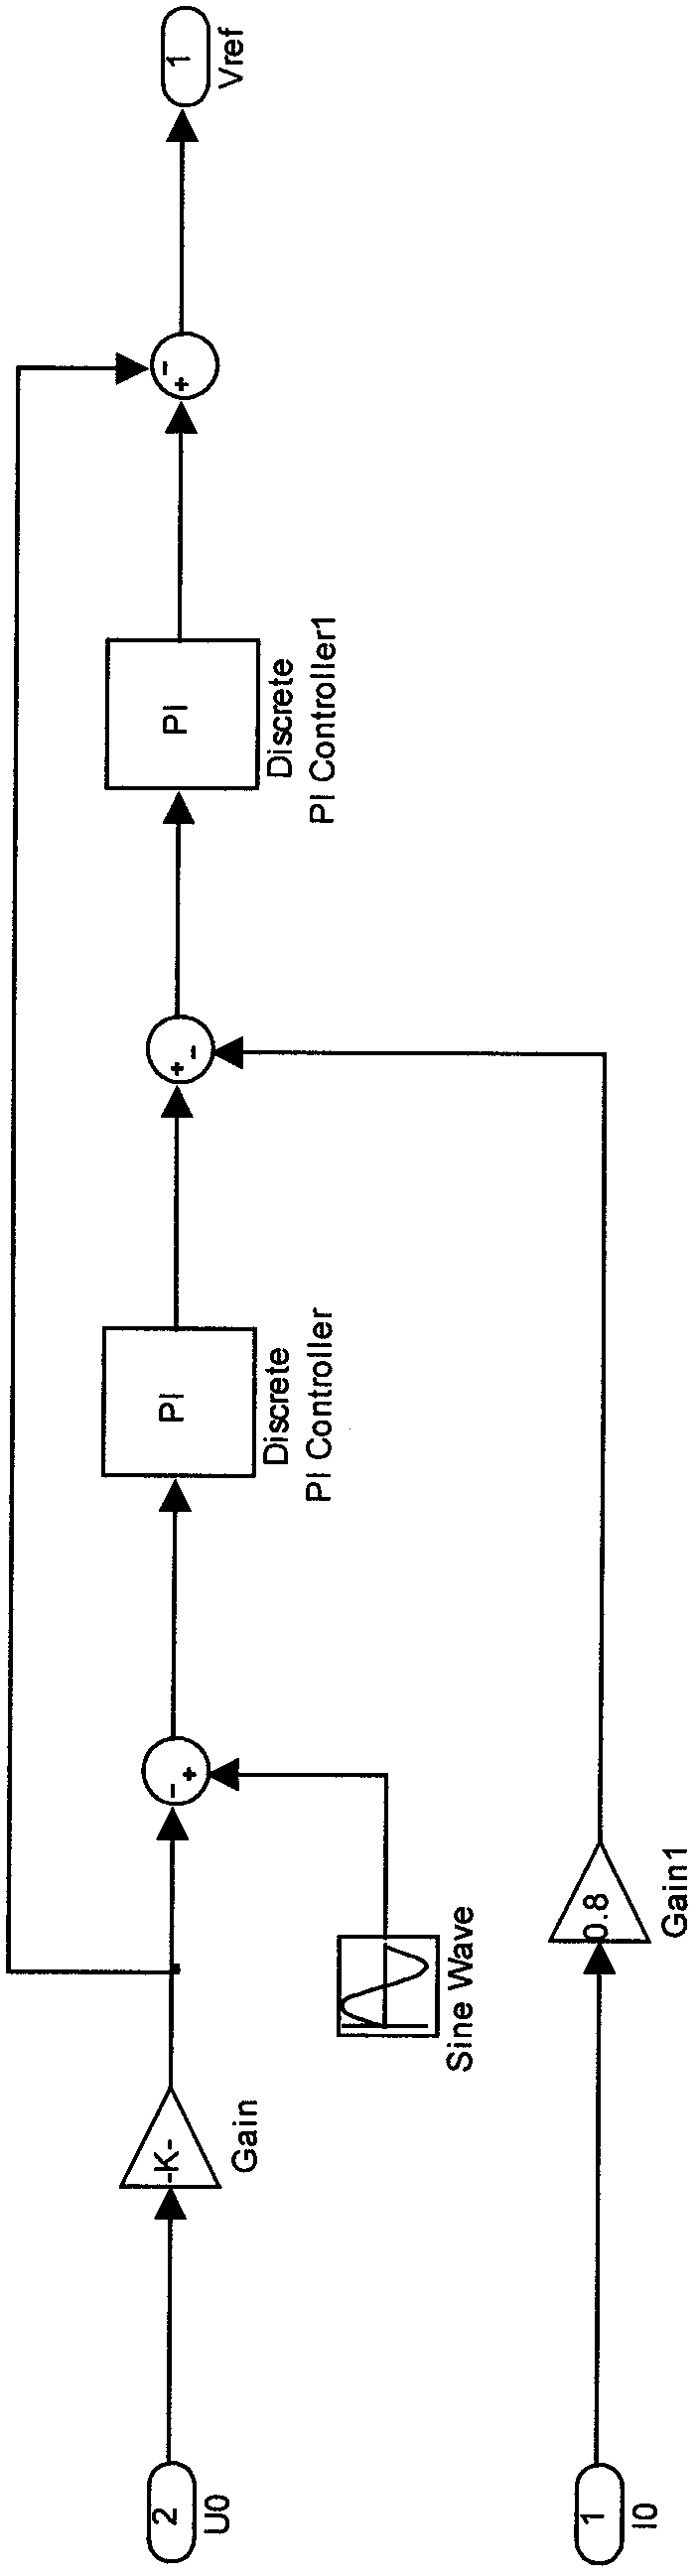 A constant pulse width output inverter control circuit and its operation mode